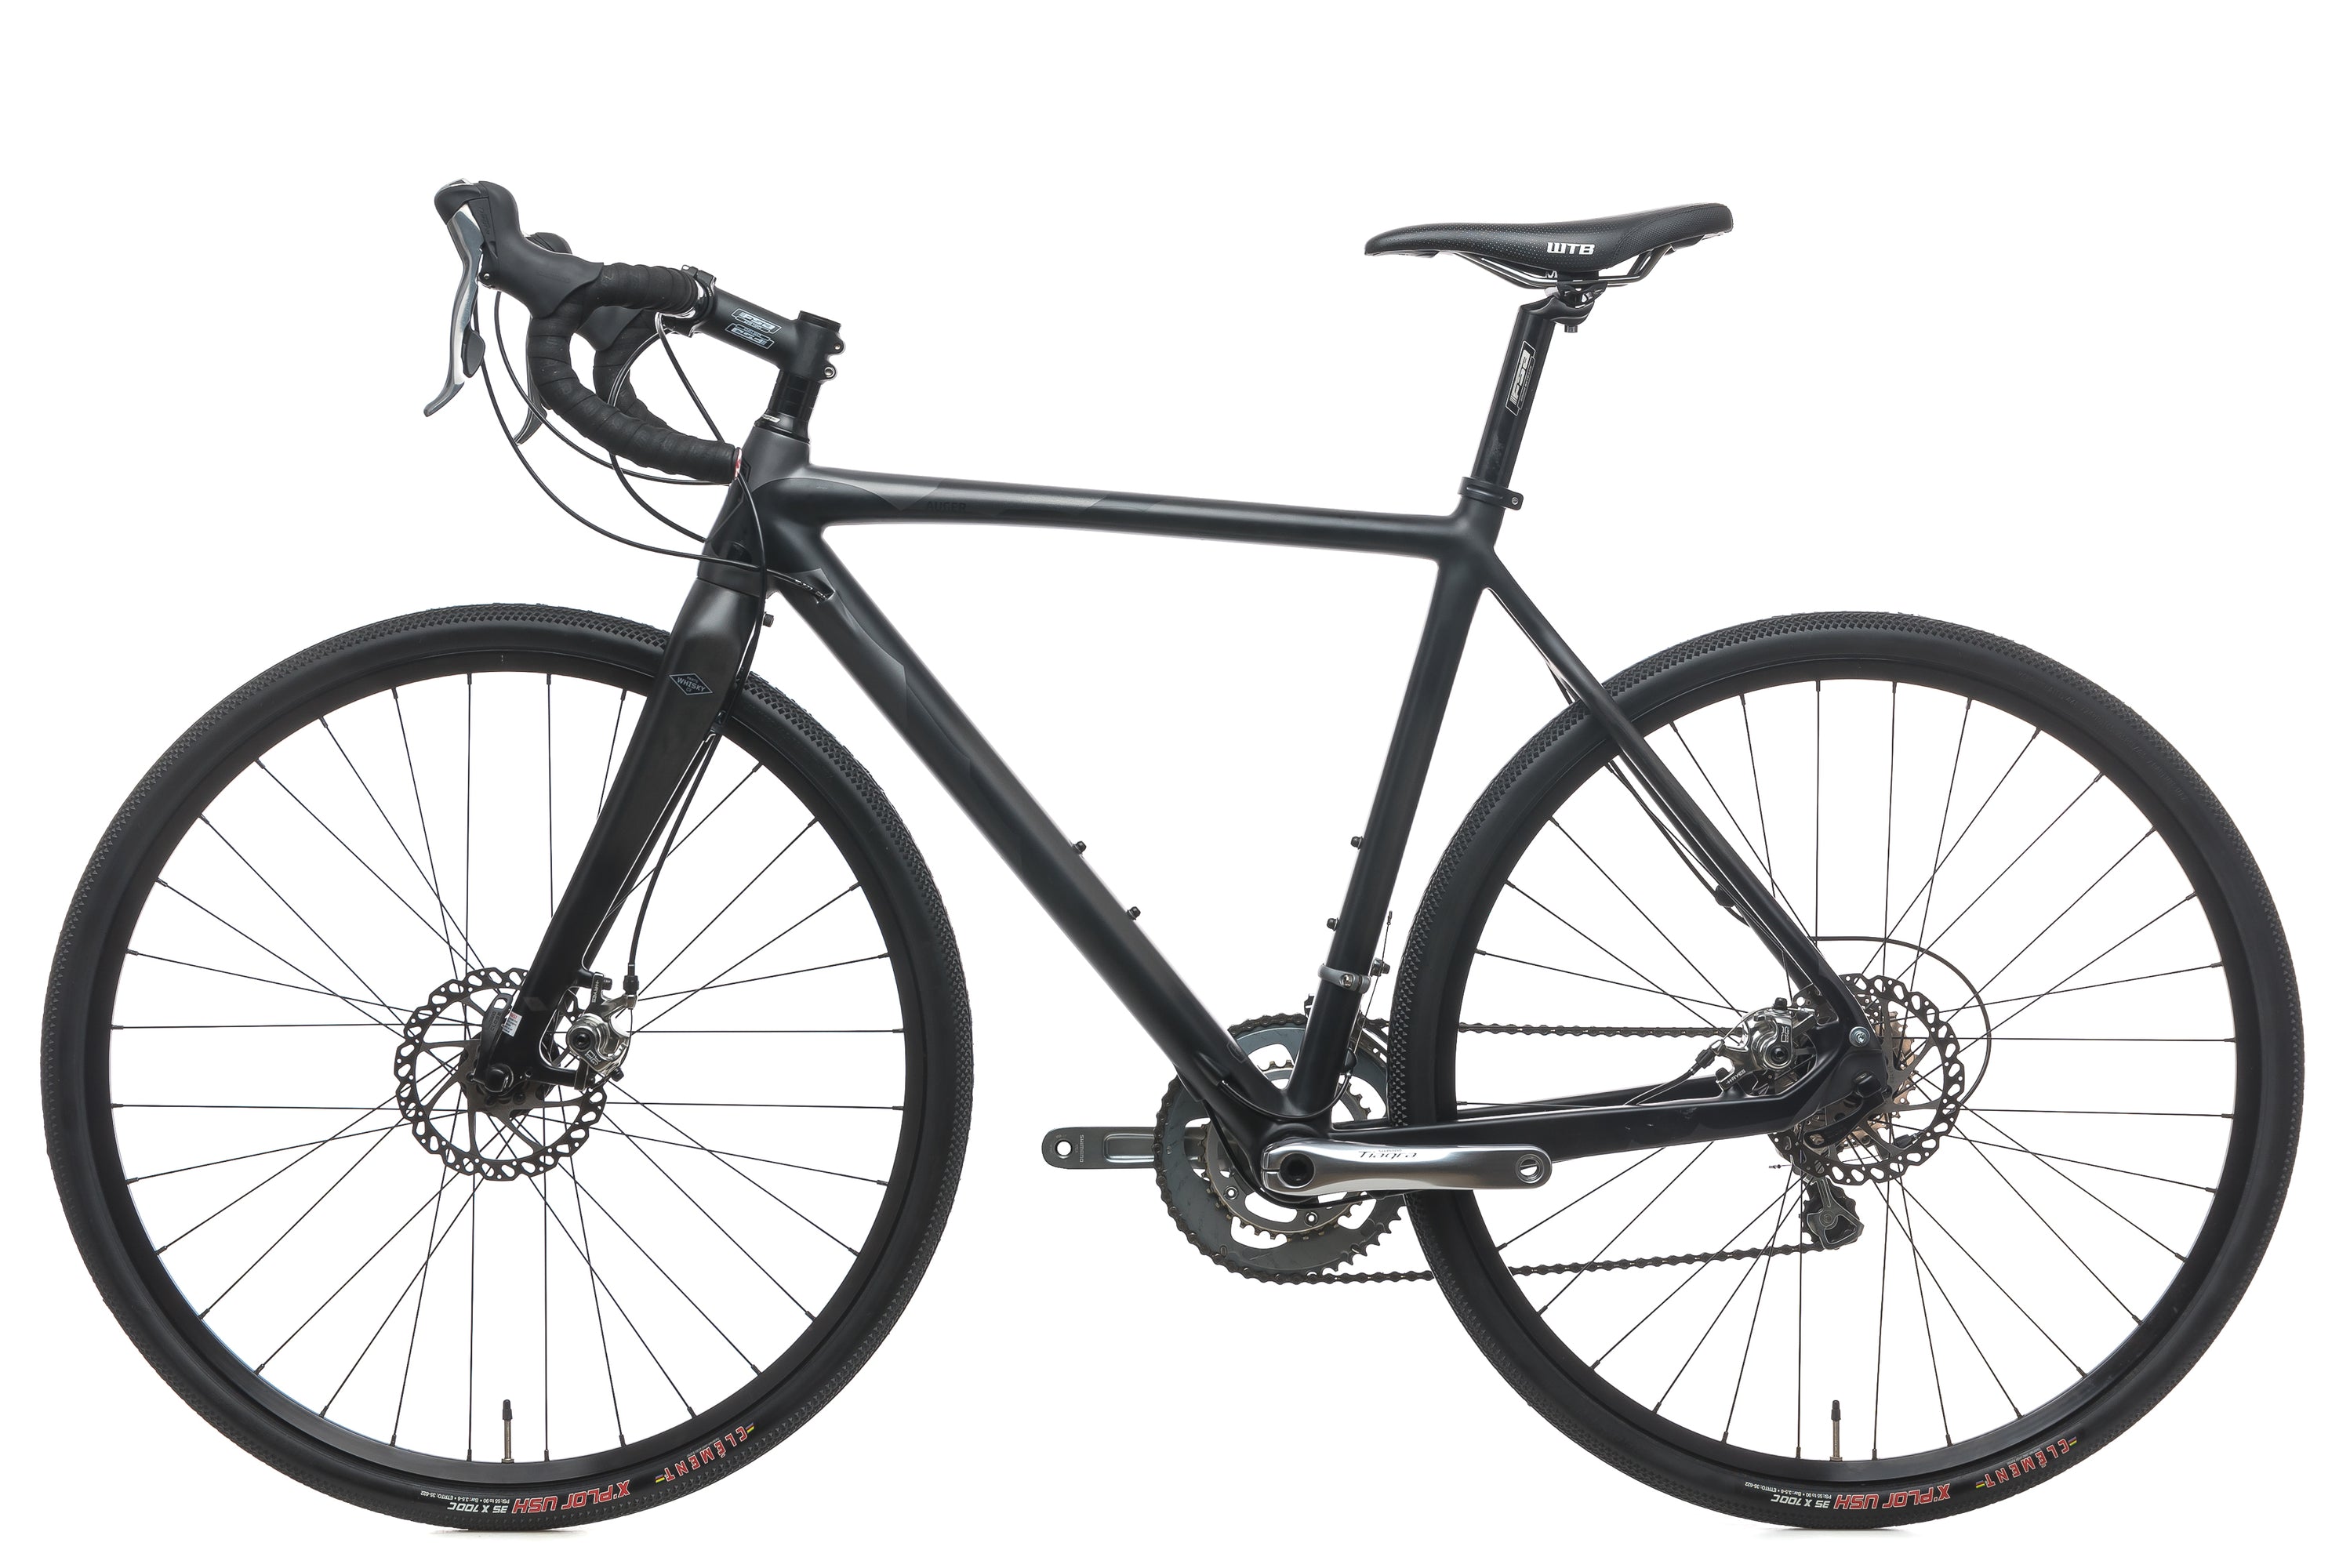 Foundry Auger 53cm Bike - 2014 non-drive side